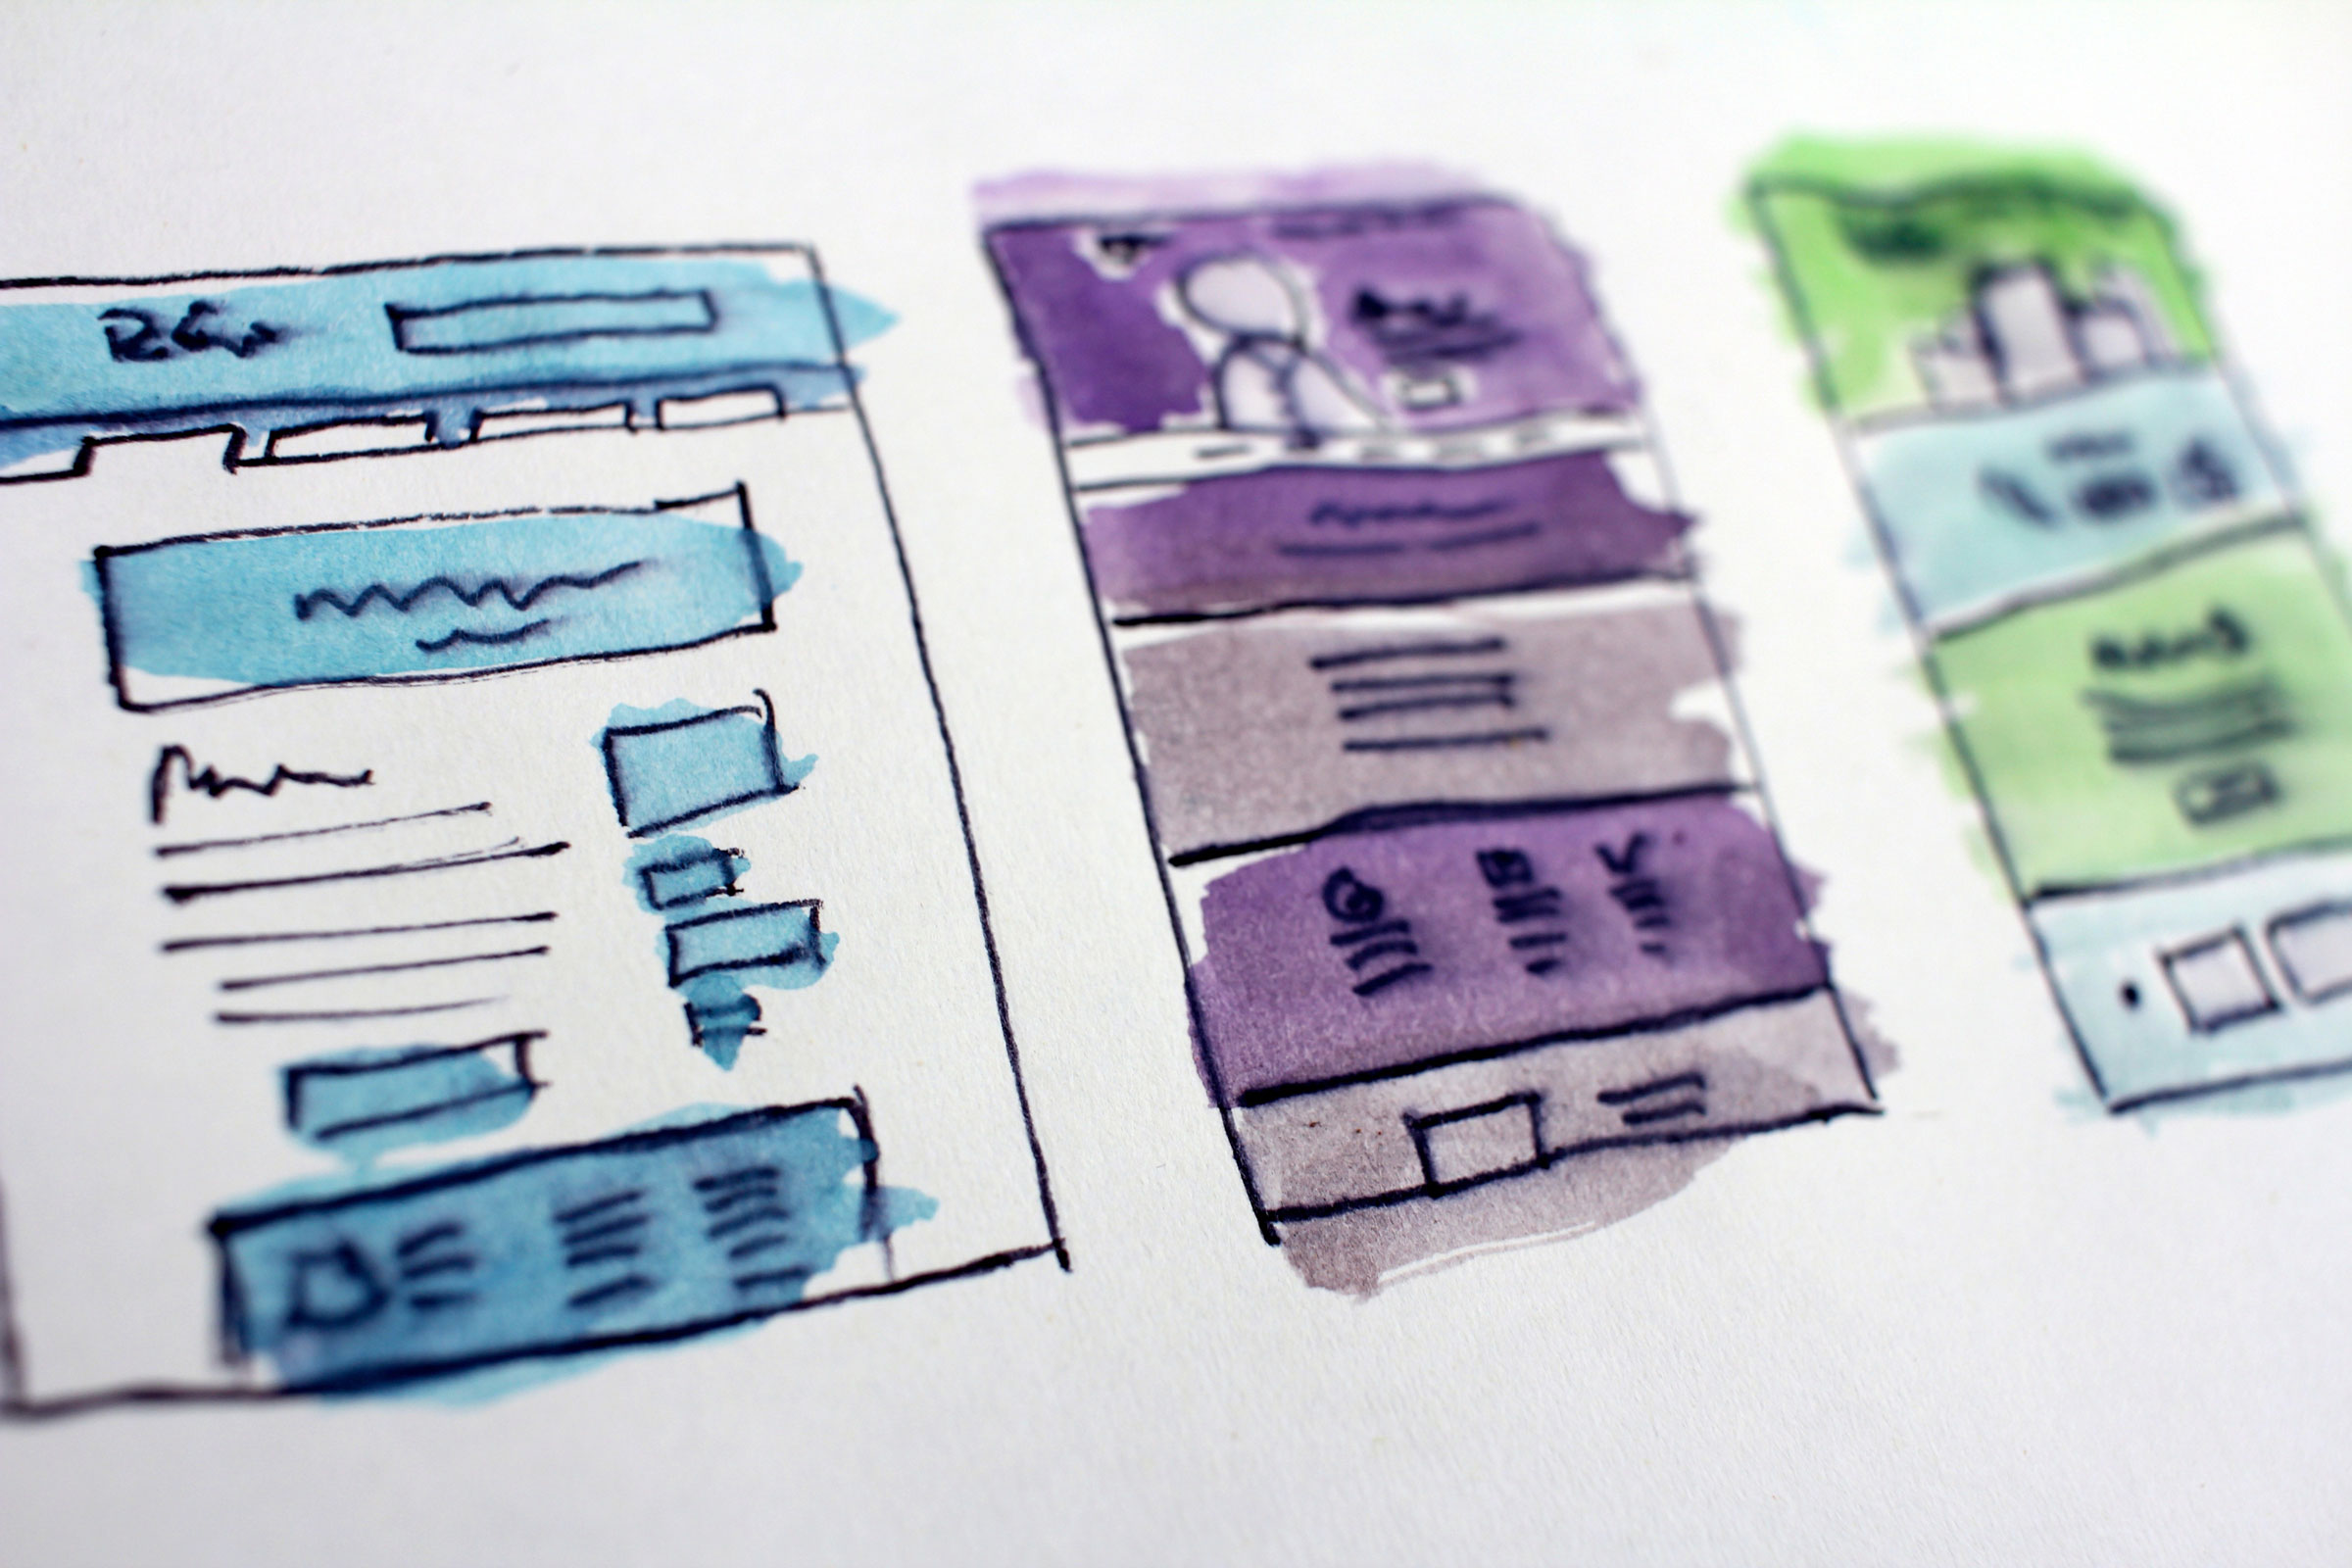 Things to consider when developing your own website